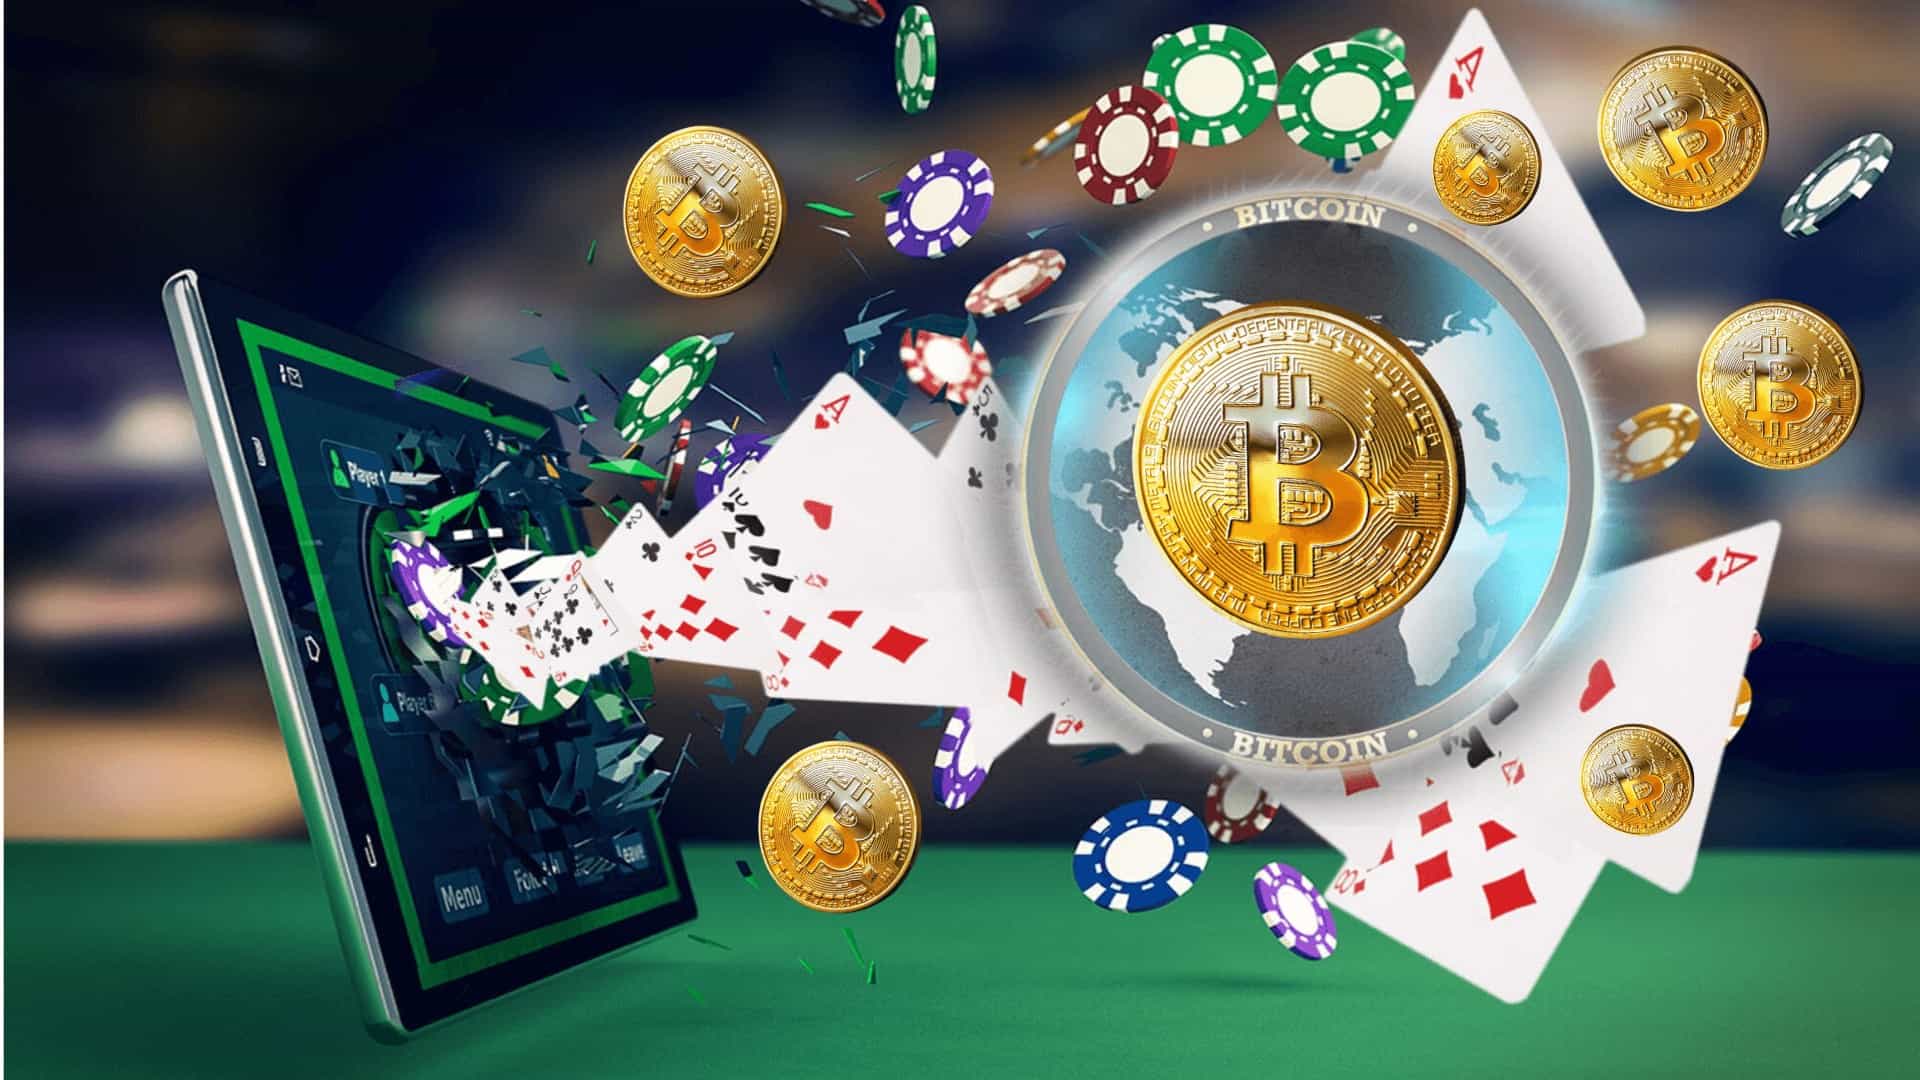 What Make cryptocurrency casino Don't Want You To Know